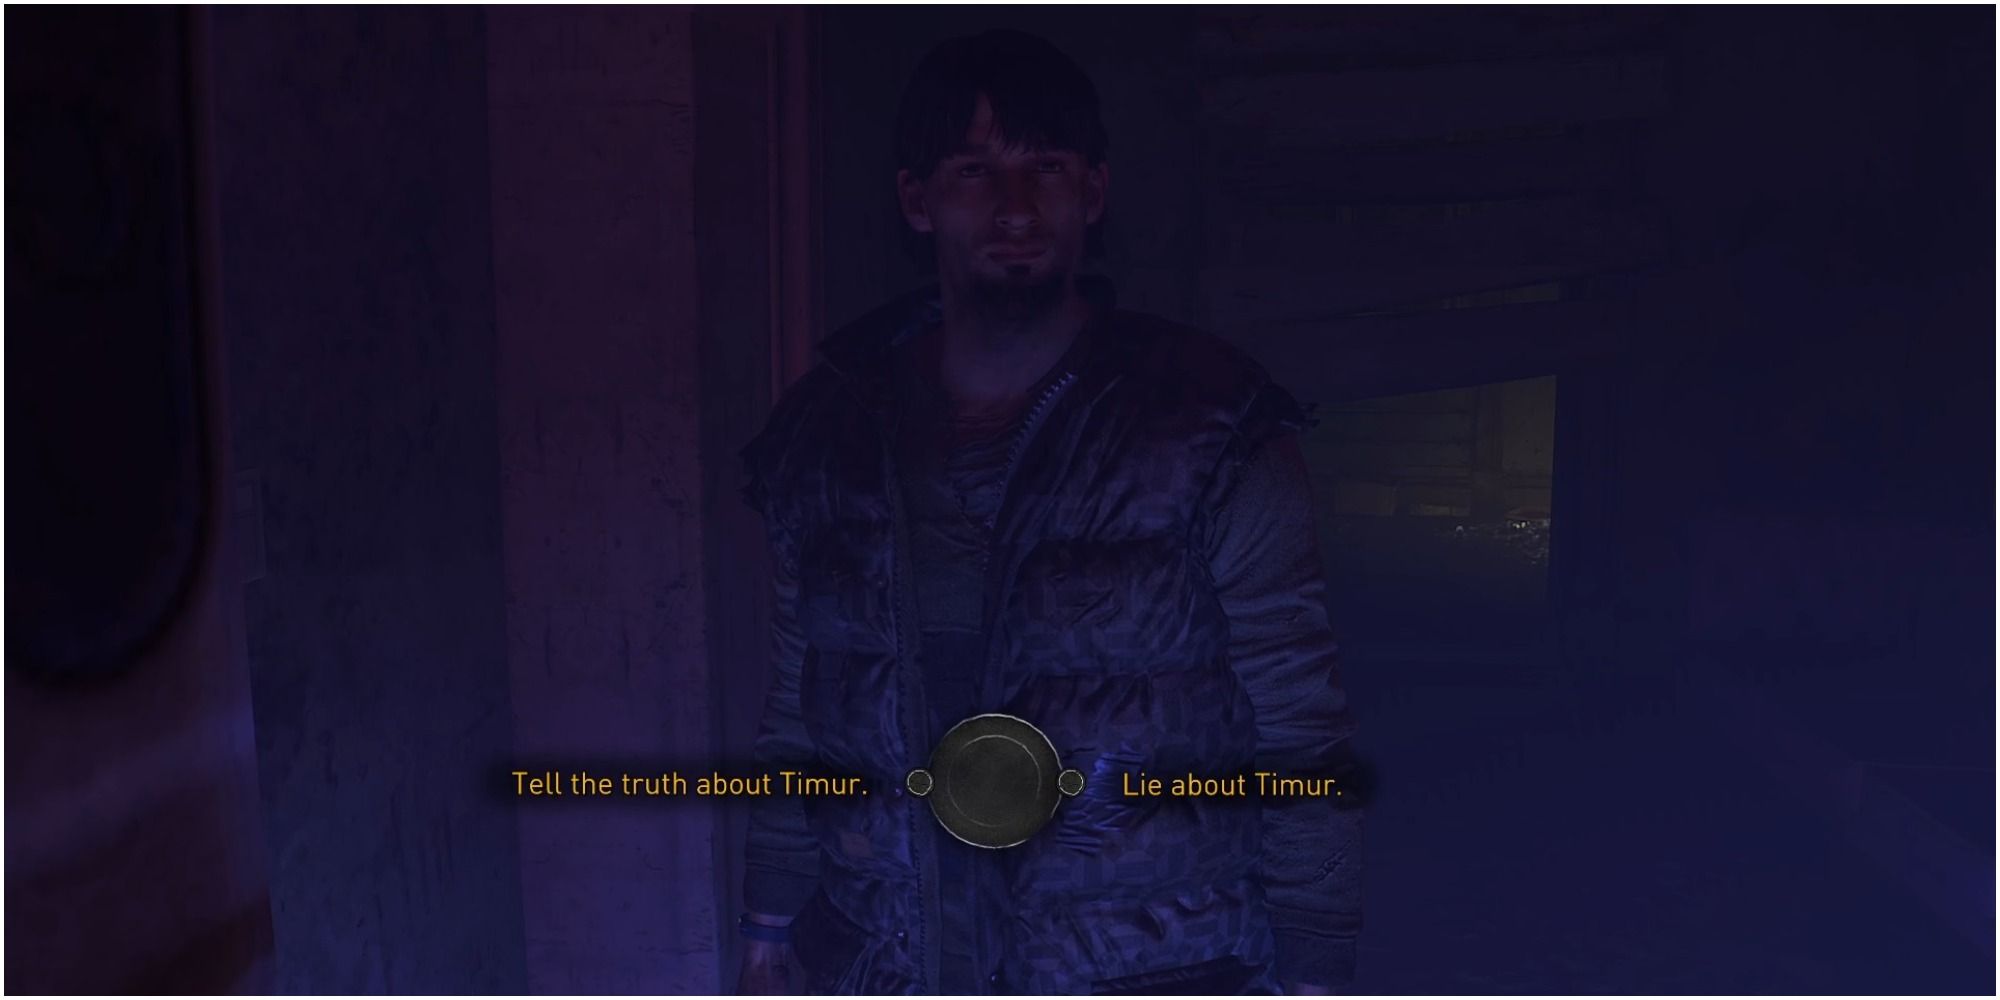 Dying Light 2 Choosing Whether To Tell The Truth Or Lie About Timur